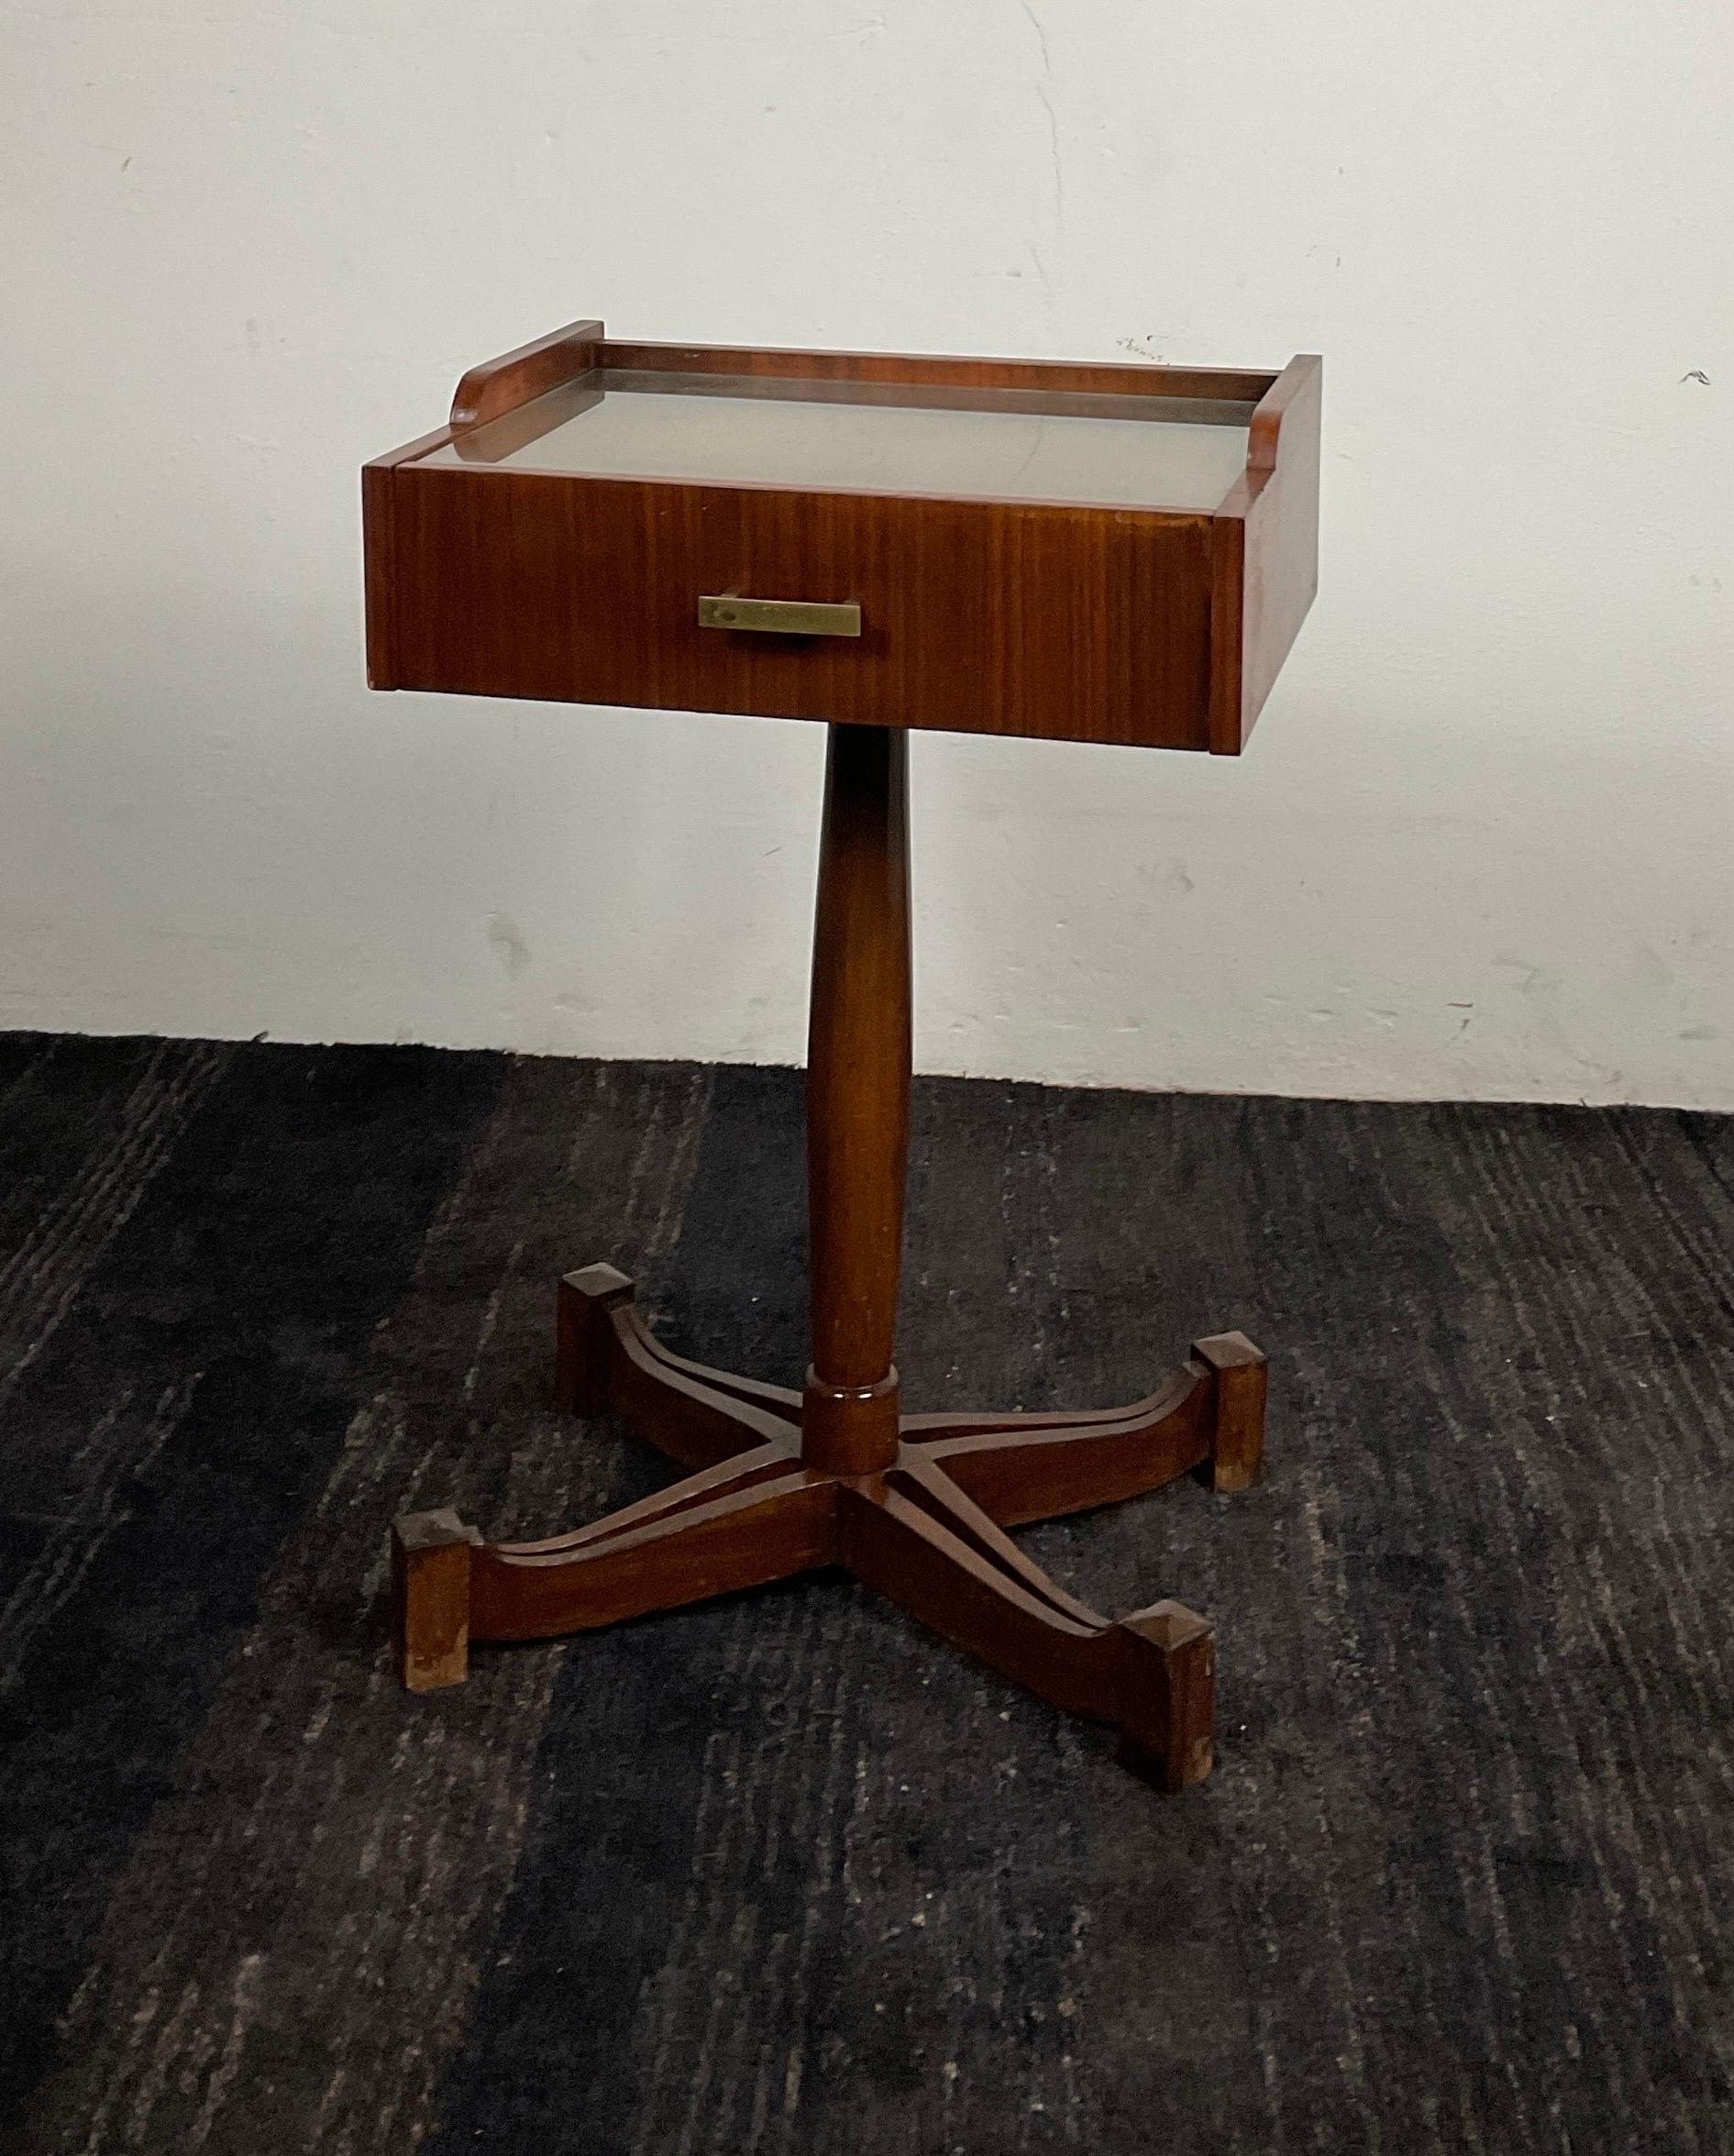 Mid-20th Century Wooden Nightstand Sc 50 Model by Carlo Salocchi for Sormani 60's, Italy For Sale